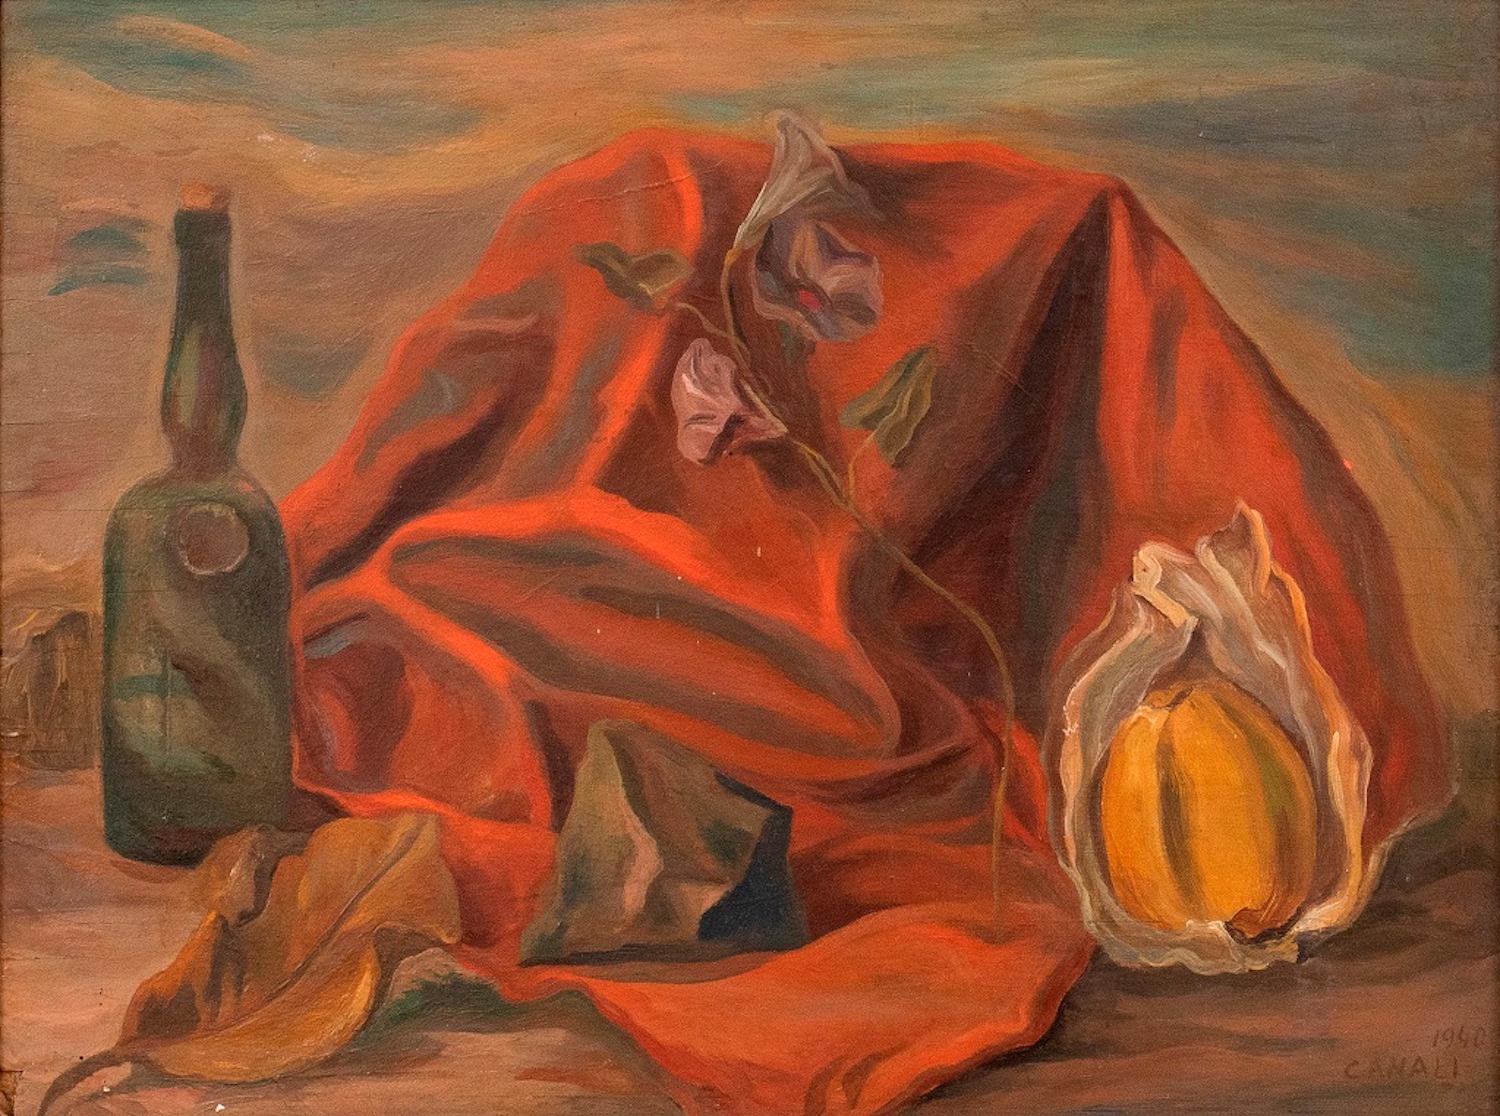 Still Life - Oil on Board by G. Canali - 1940